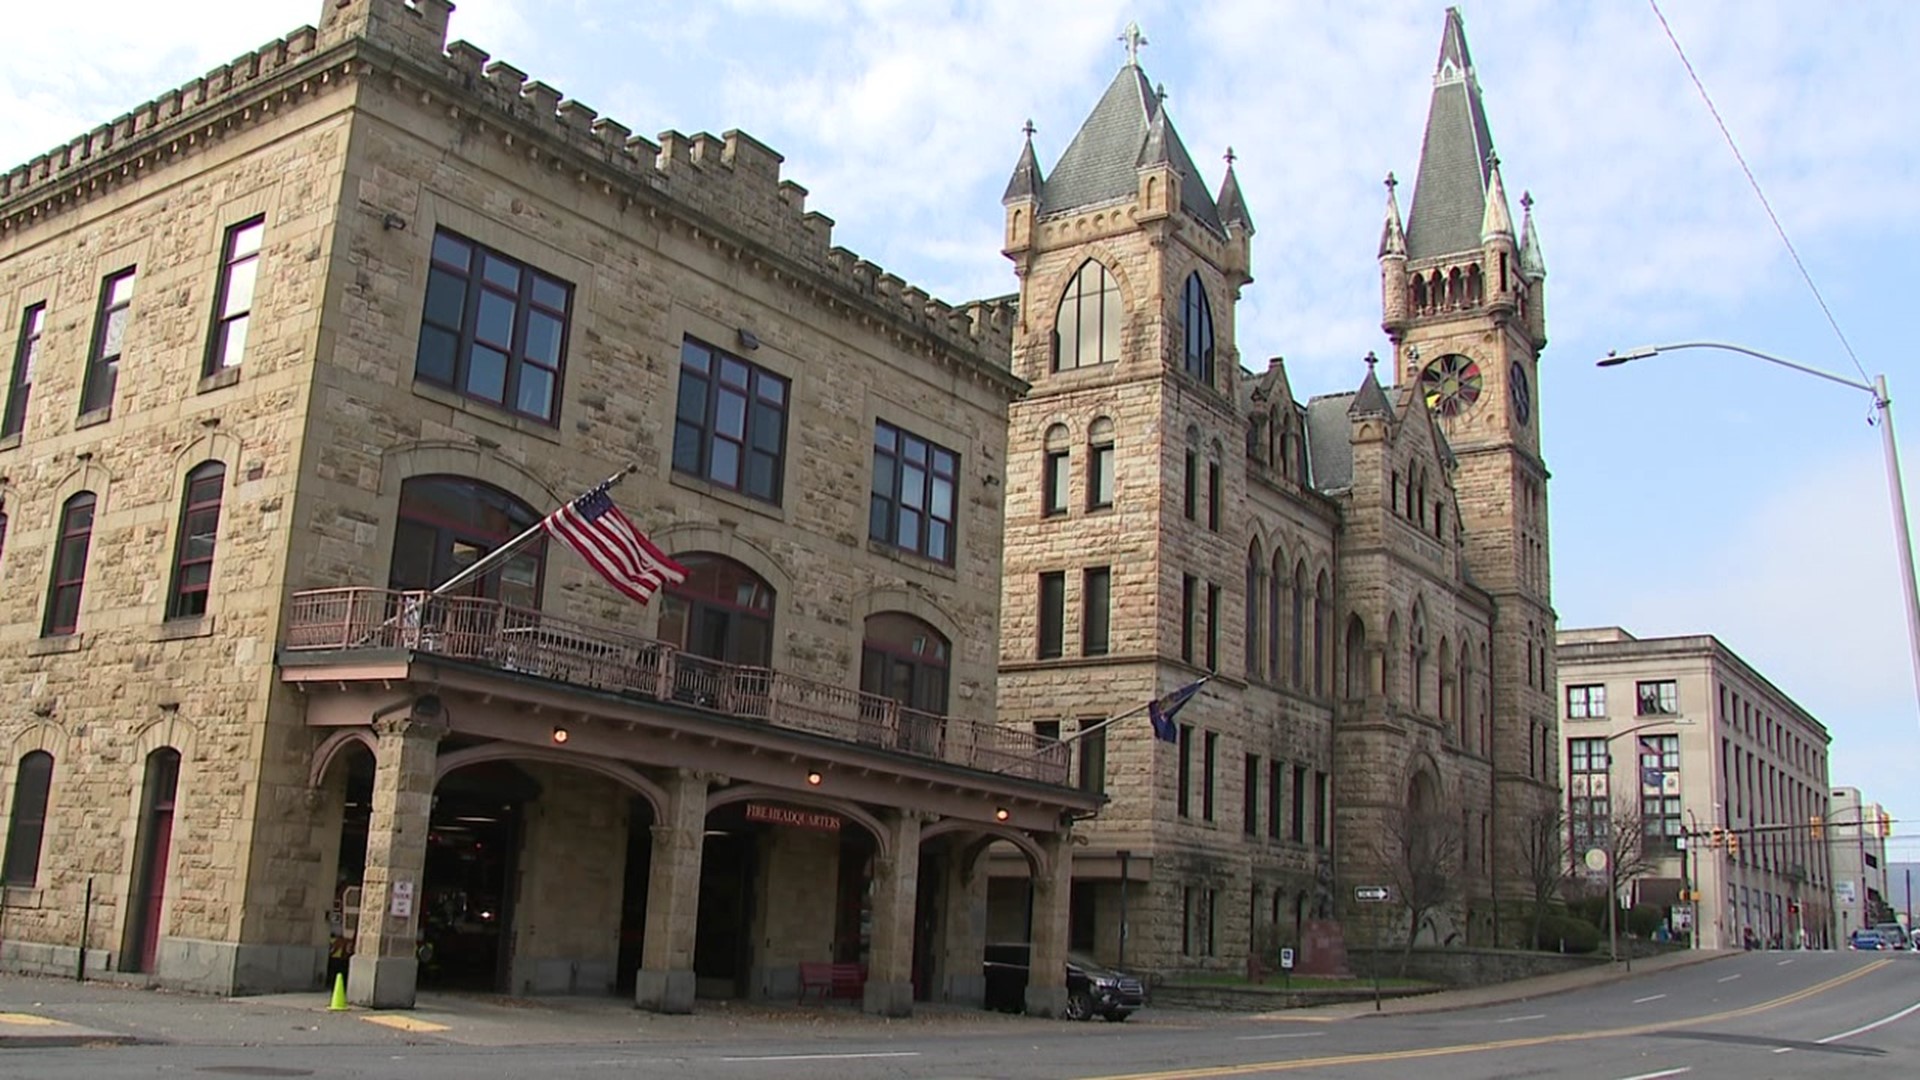 A charitable fund will support parks and preserve historical buildings in Scranton. Newswatch 16's Courtney Harrison spoke with city officials about the new plan.